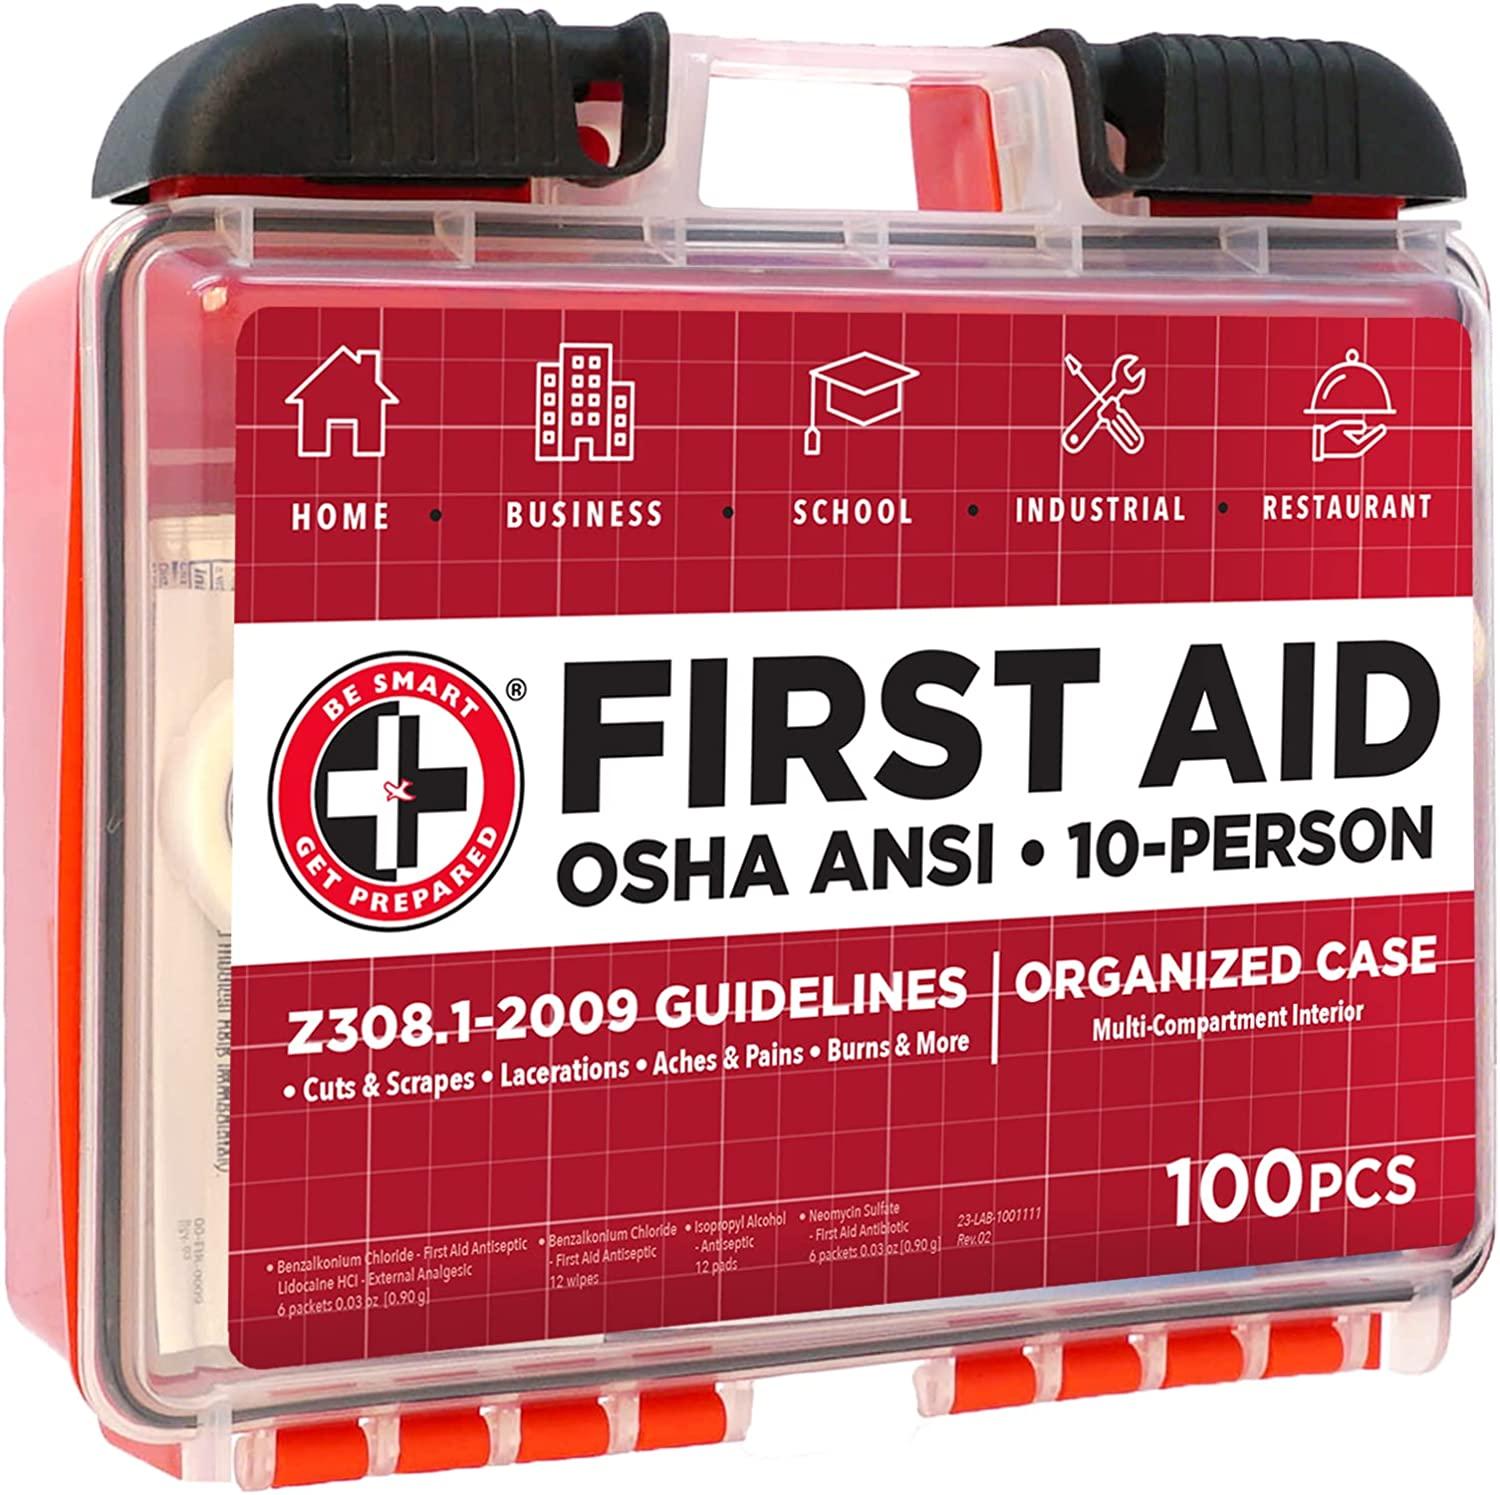 IAMAT  How to assemble the pefect first aid kit